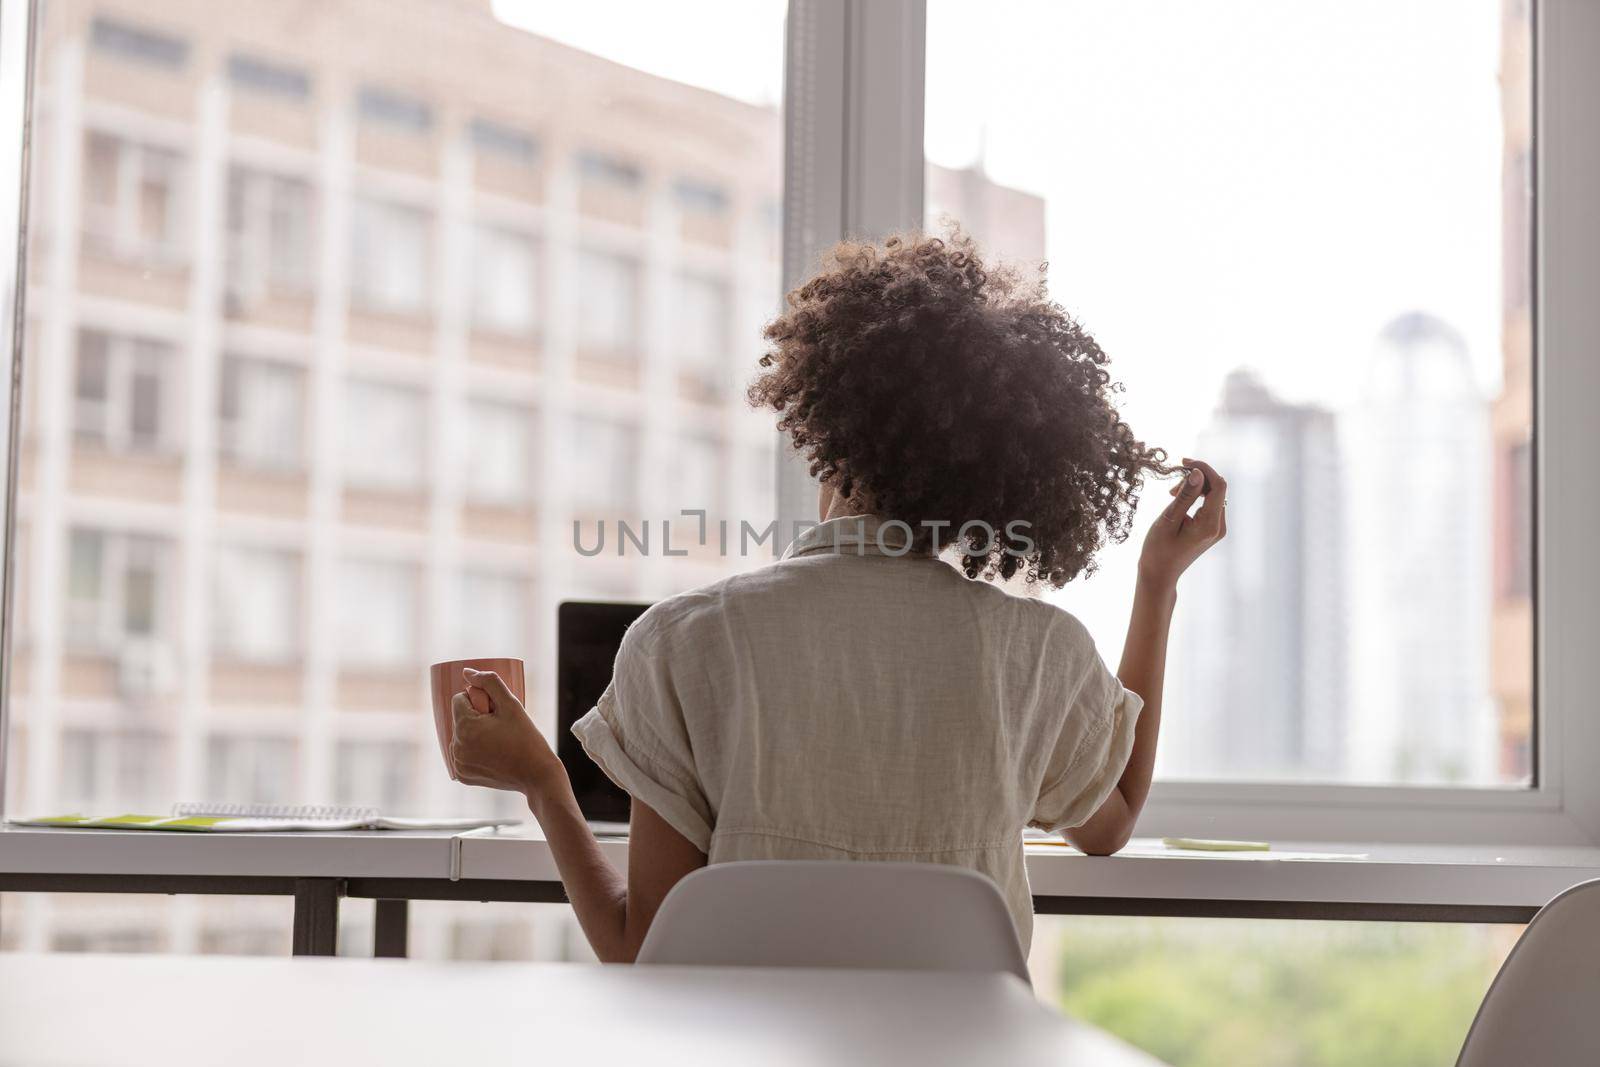 Back view of young woman sitting at desk near window while using laptop and holding cup. Copy space